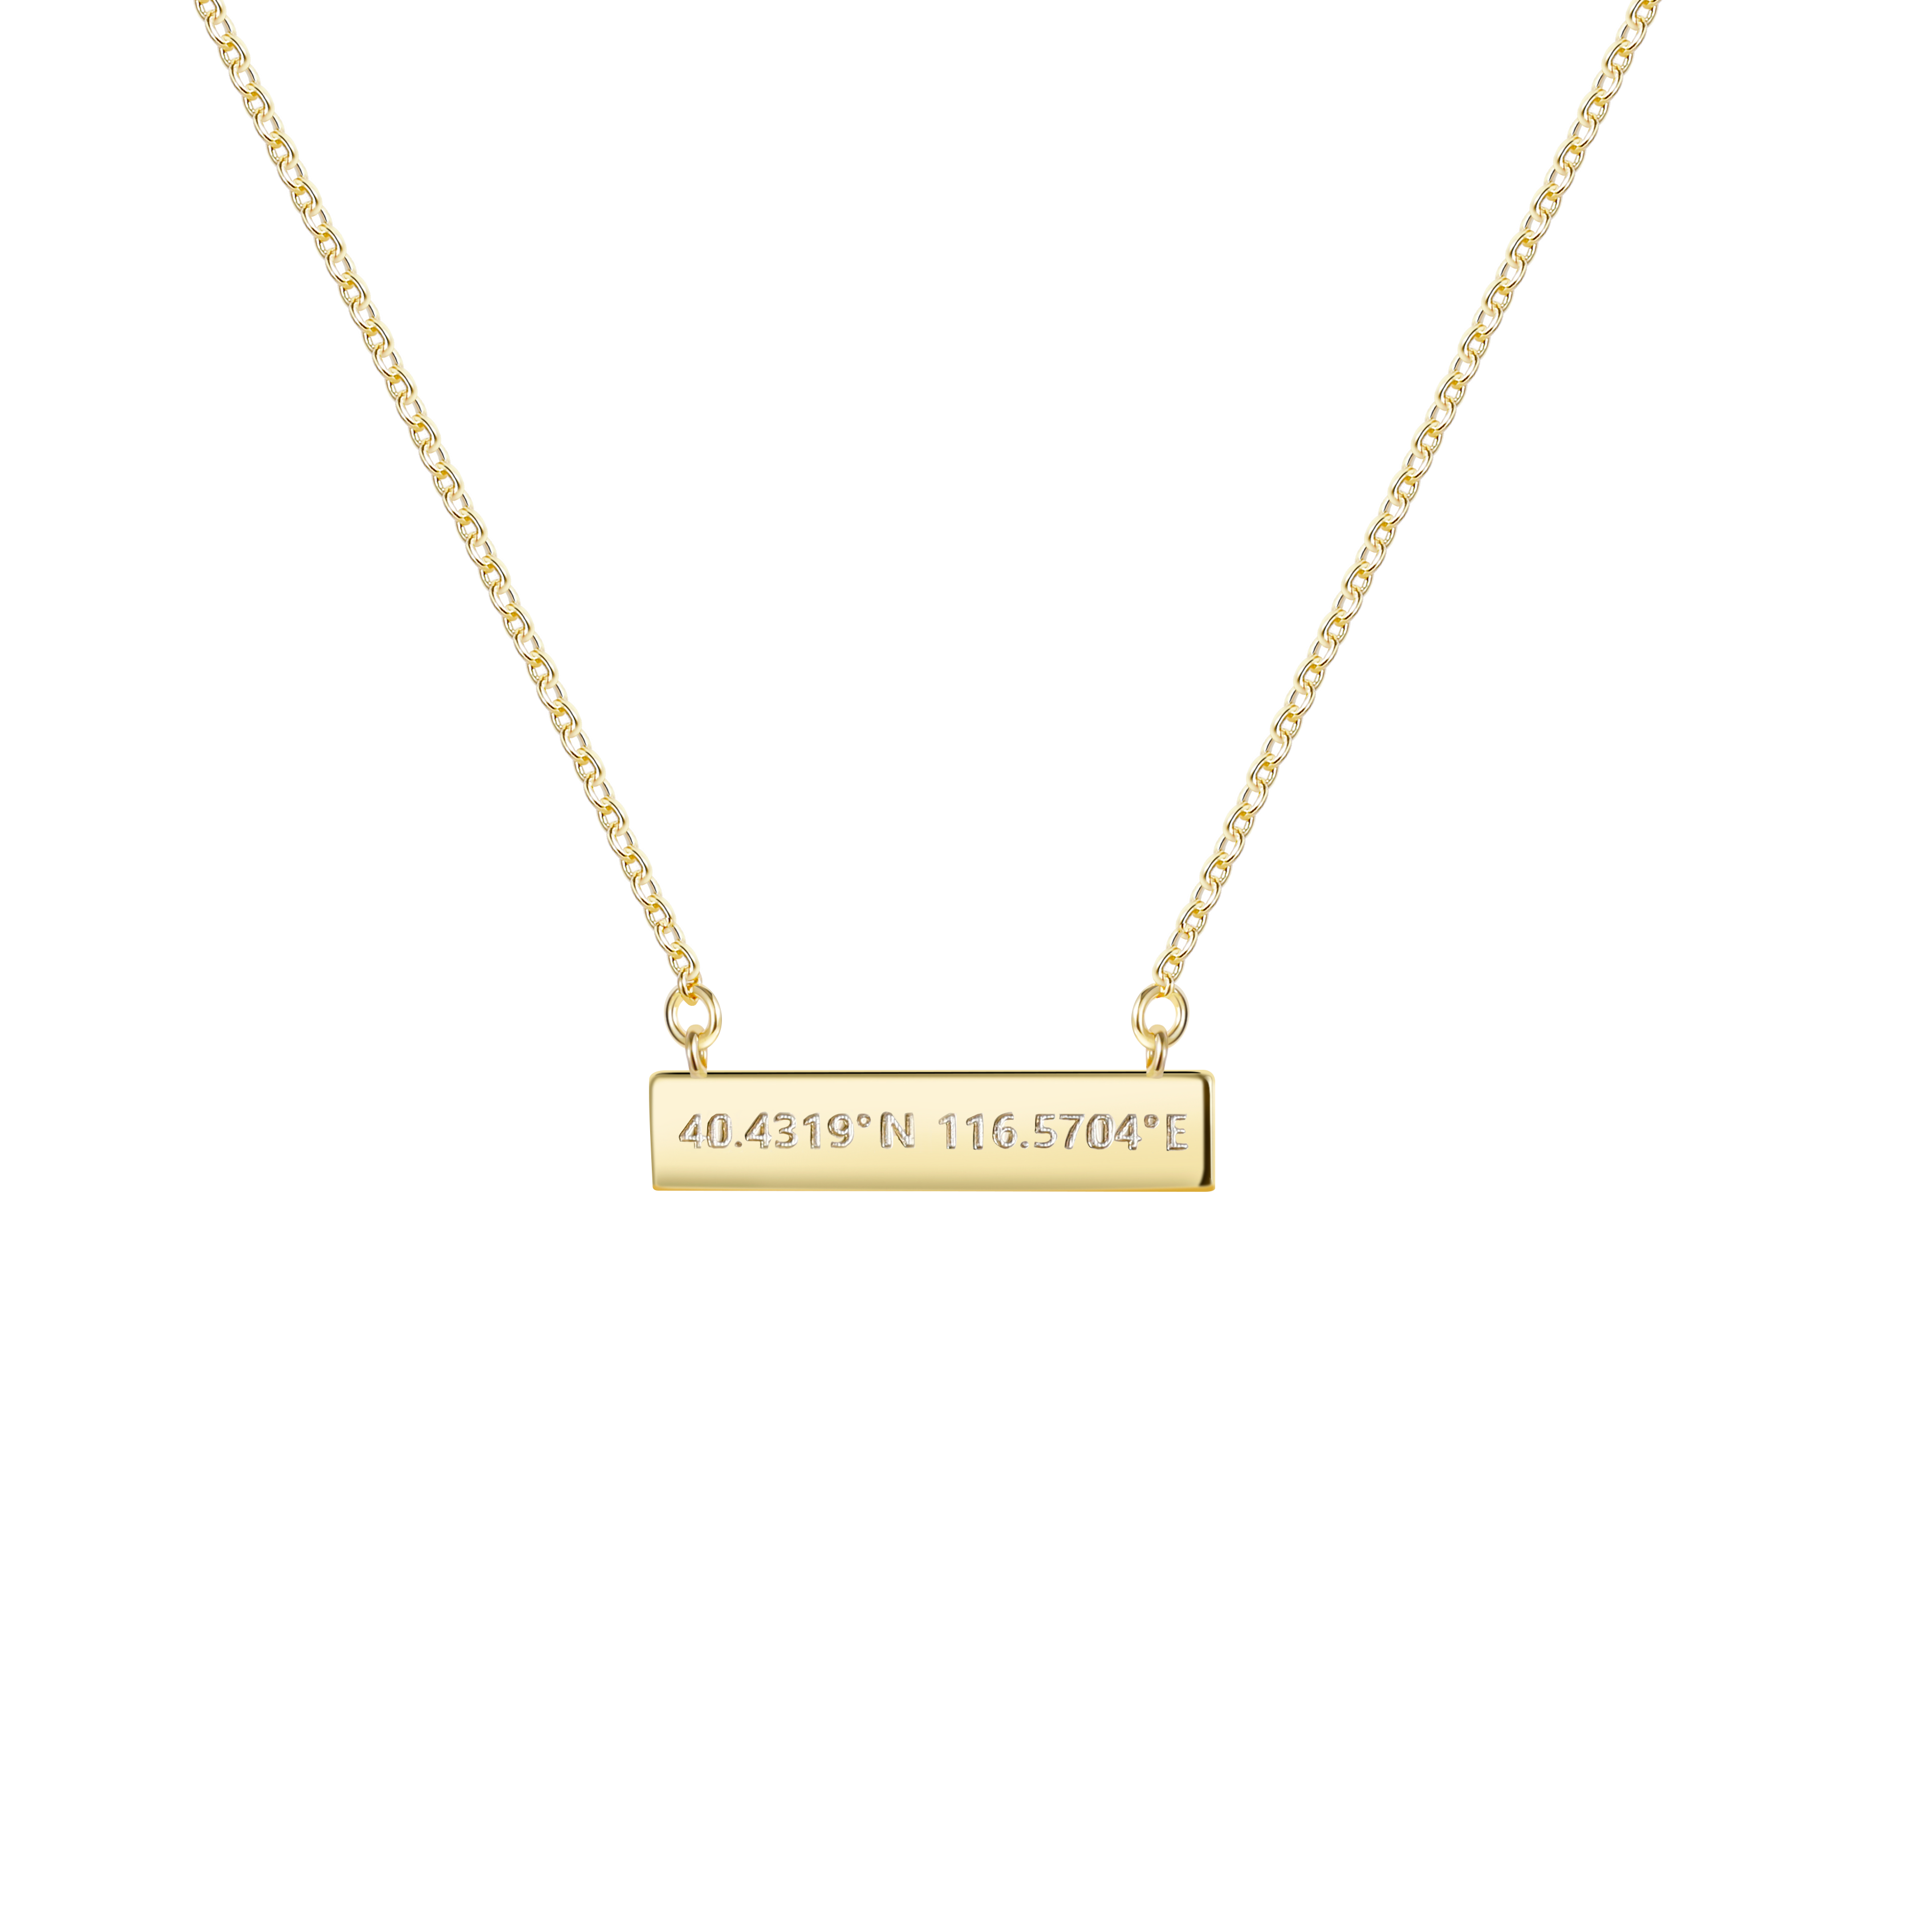 bar necklace for women, personalized necklace, solid gold pendant